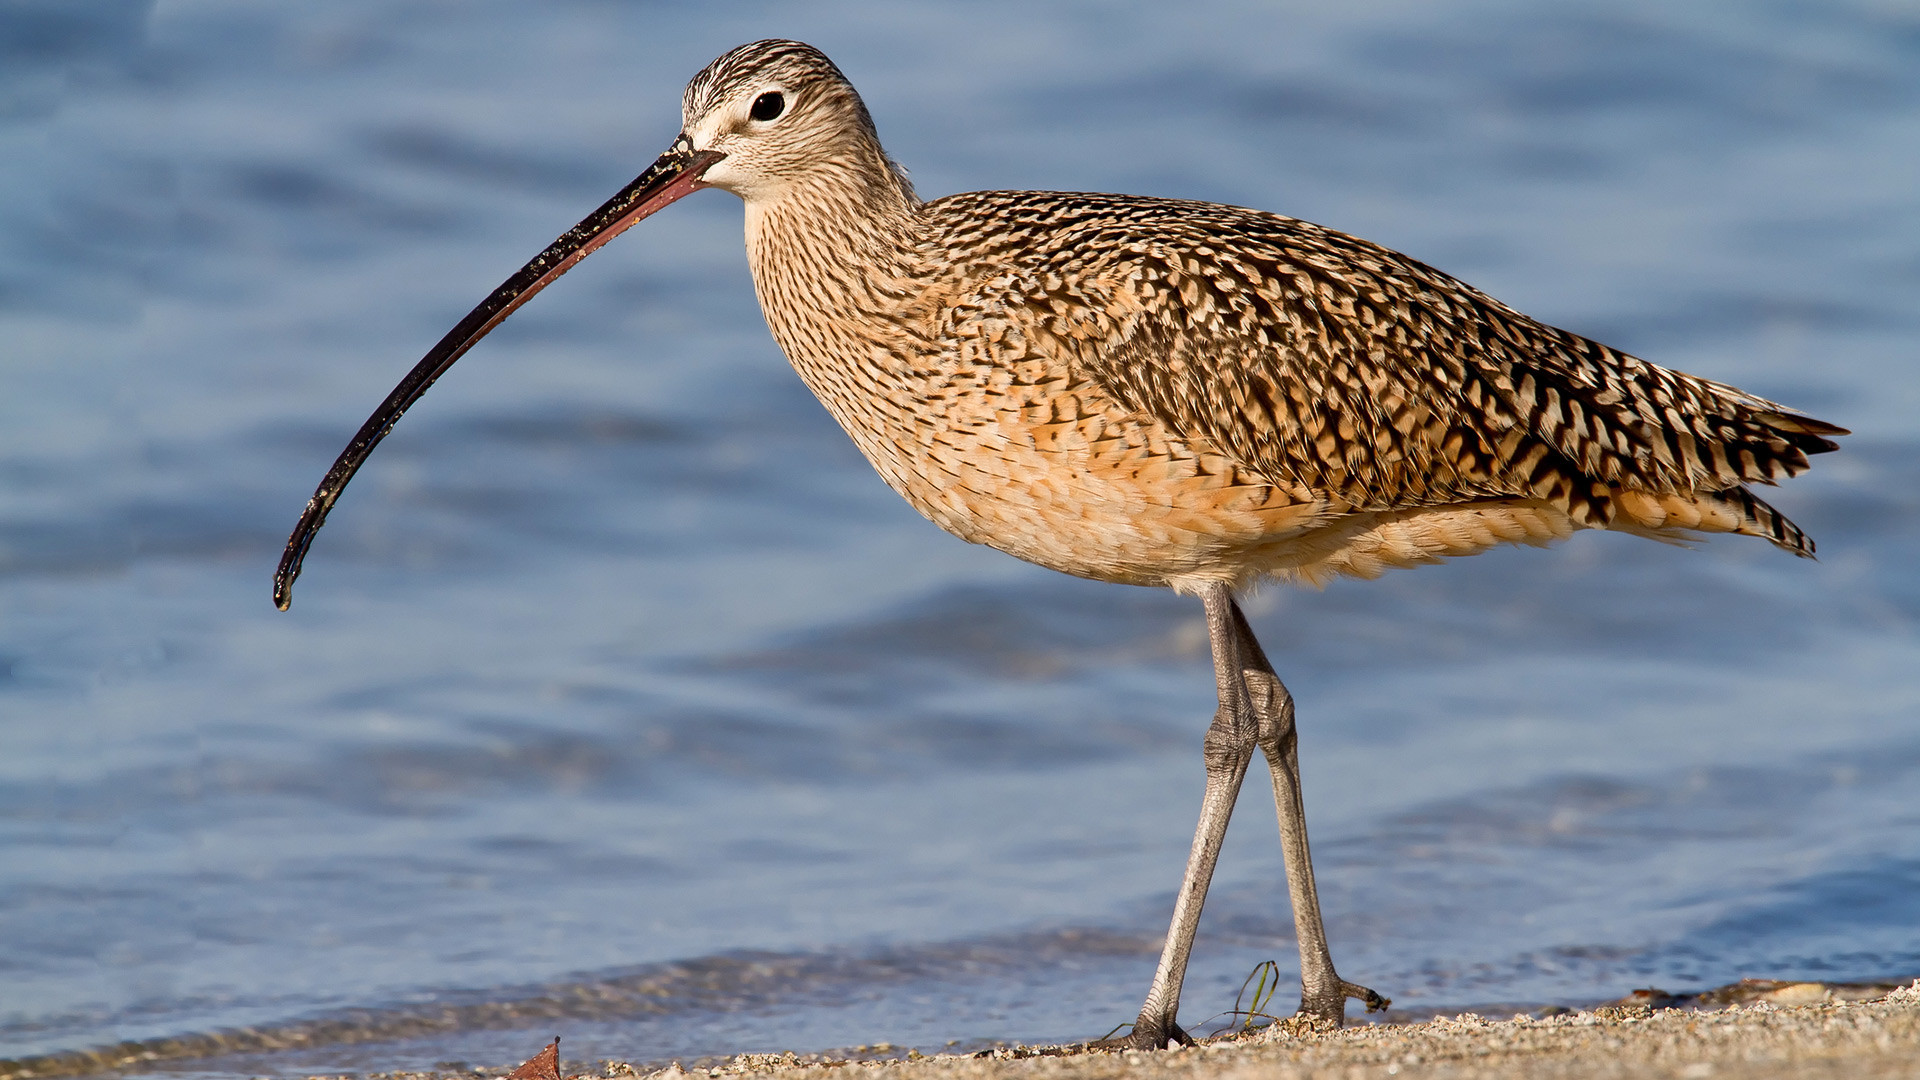 Over the past decades, the slender-billed curlew has disappeared in Russia.